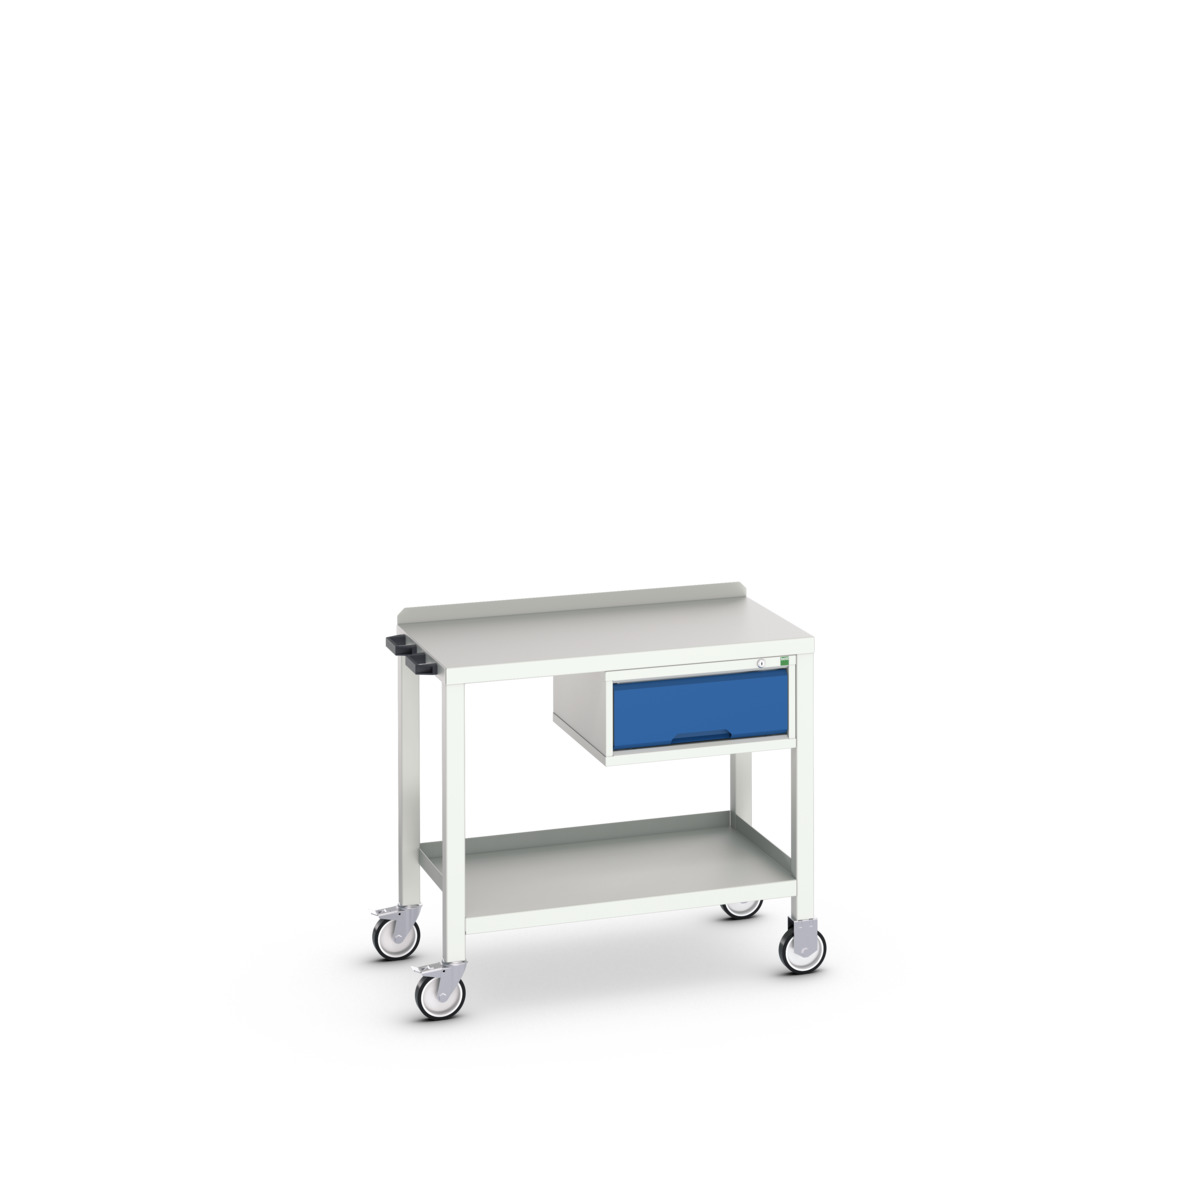 16922800.11 - verso mobile welded bench